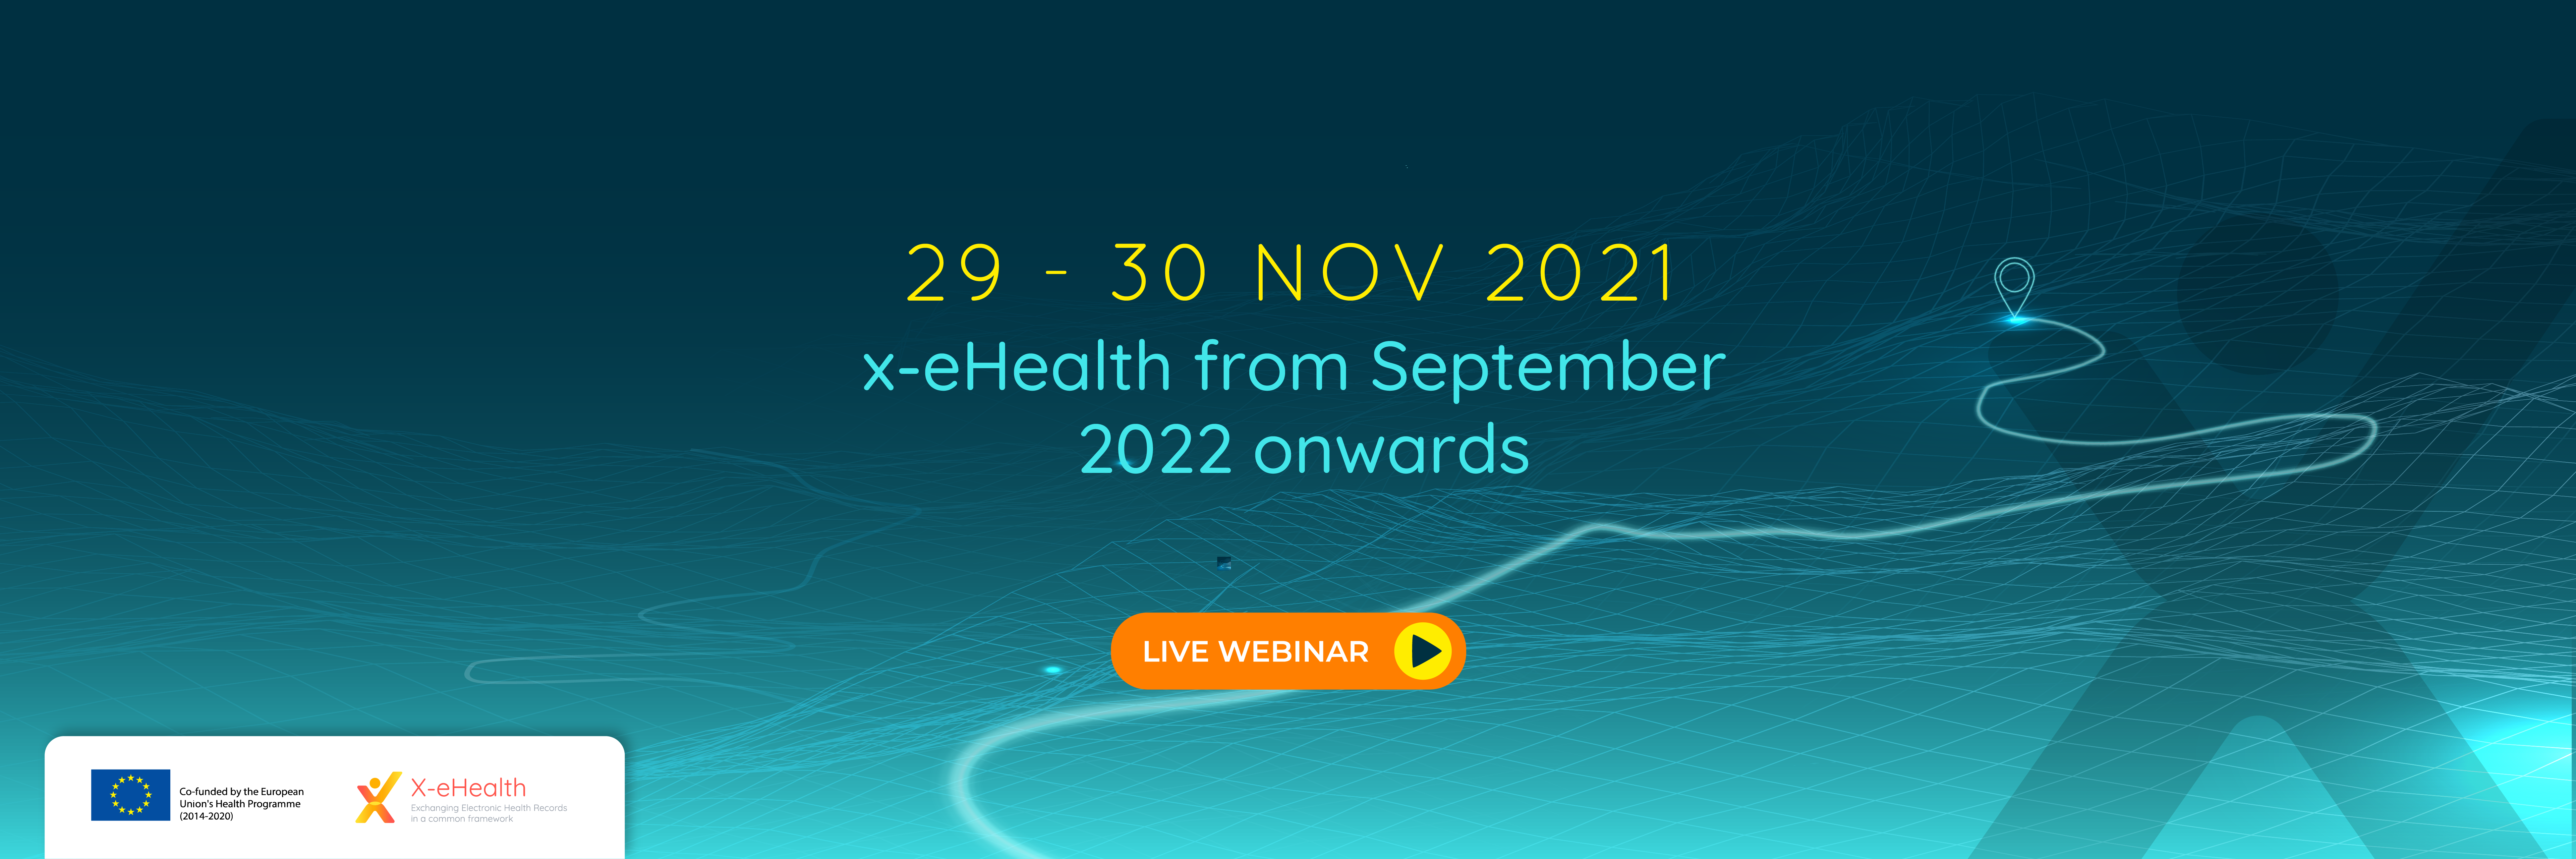 x-ehealth from september 2022 onwards